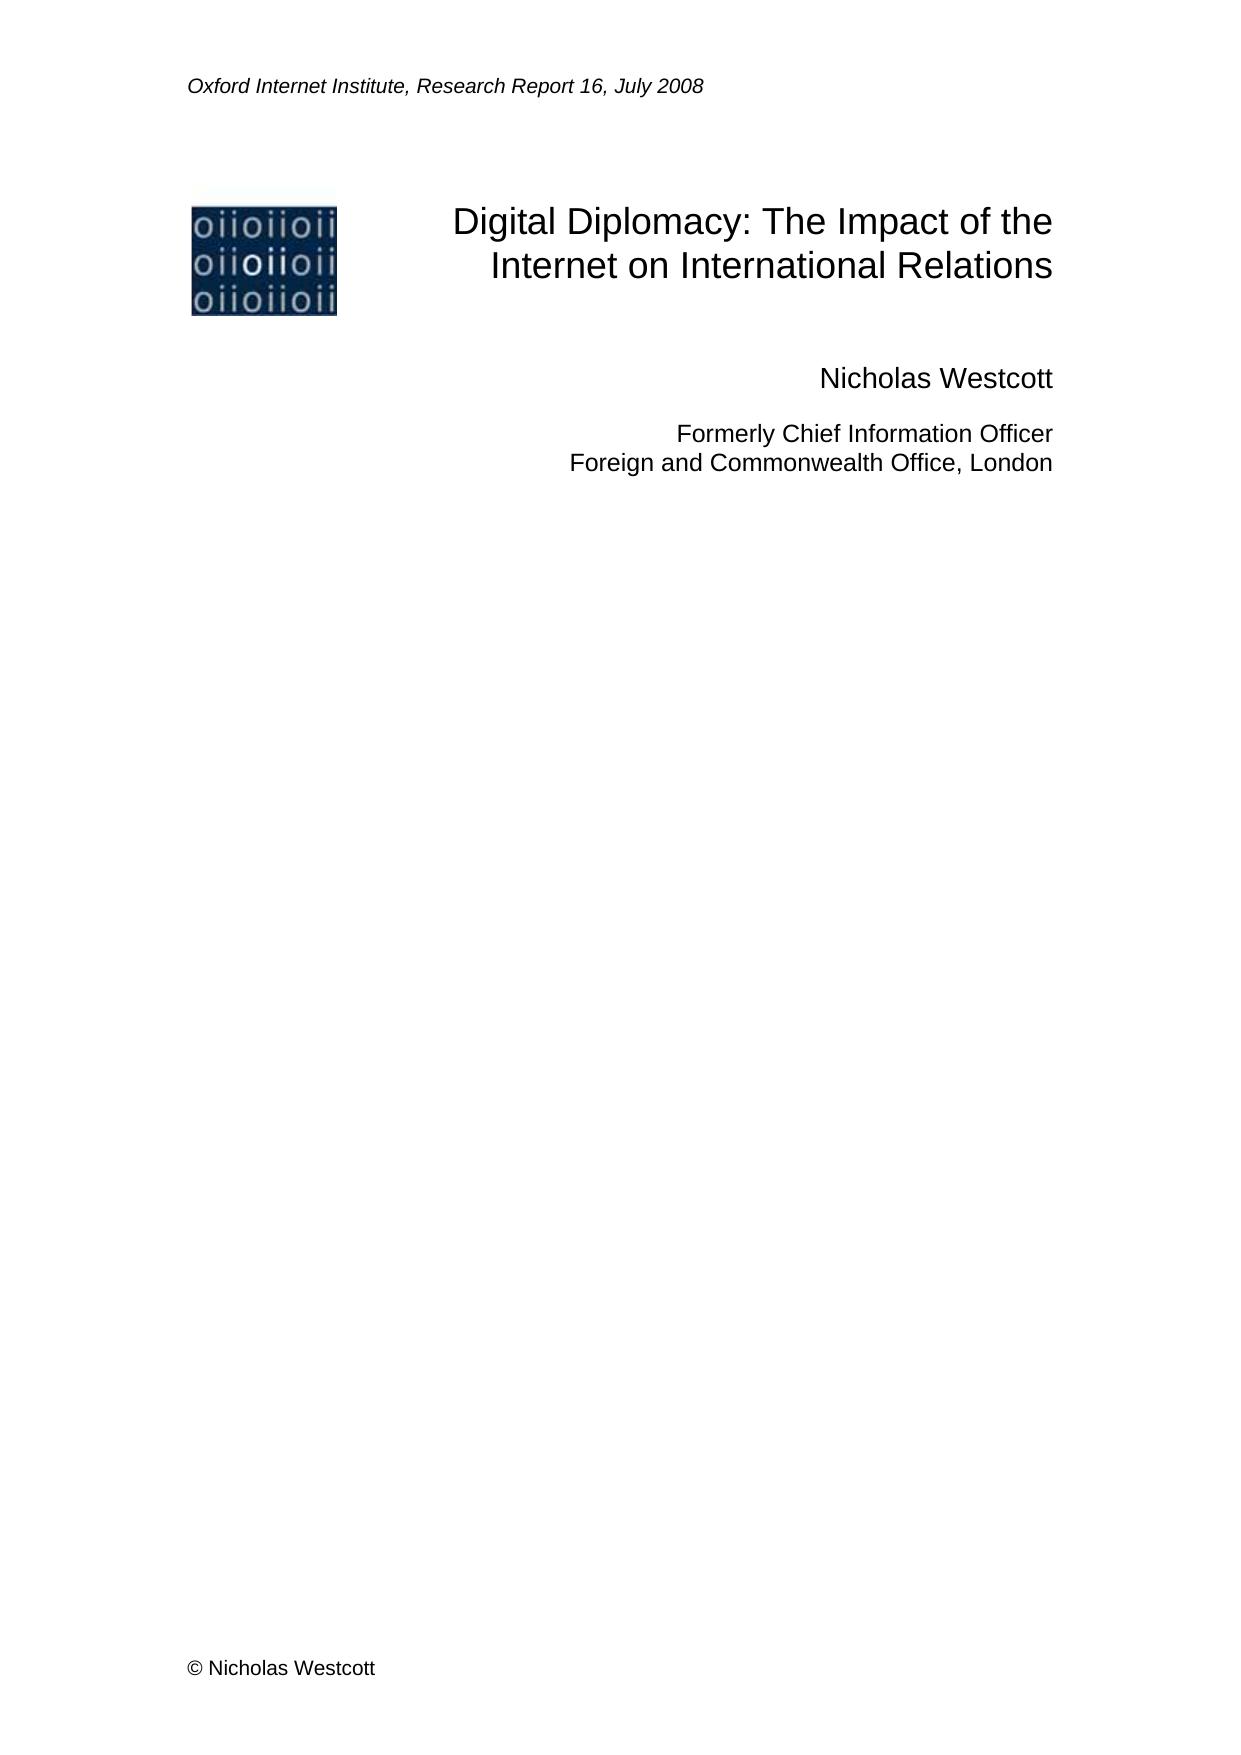 Digital Diplomacy: The Impact of the Internet on International Relations